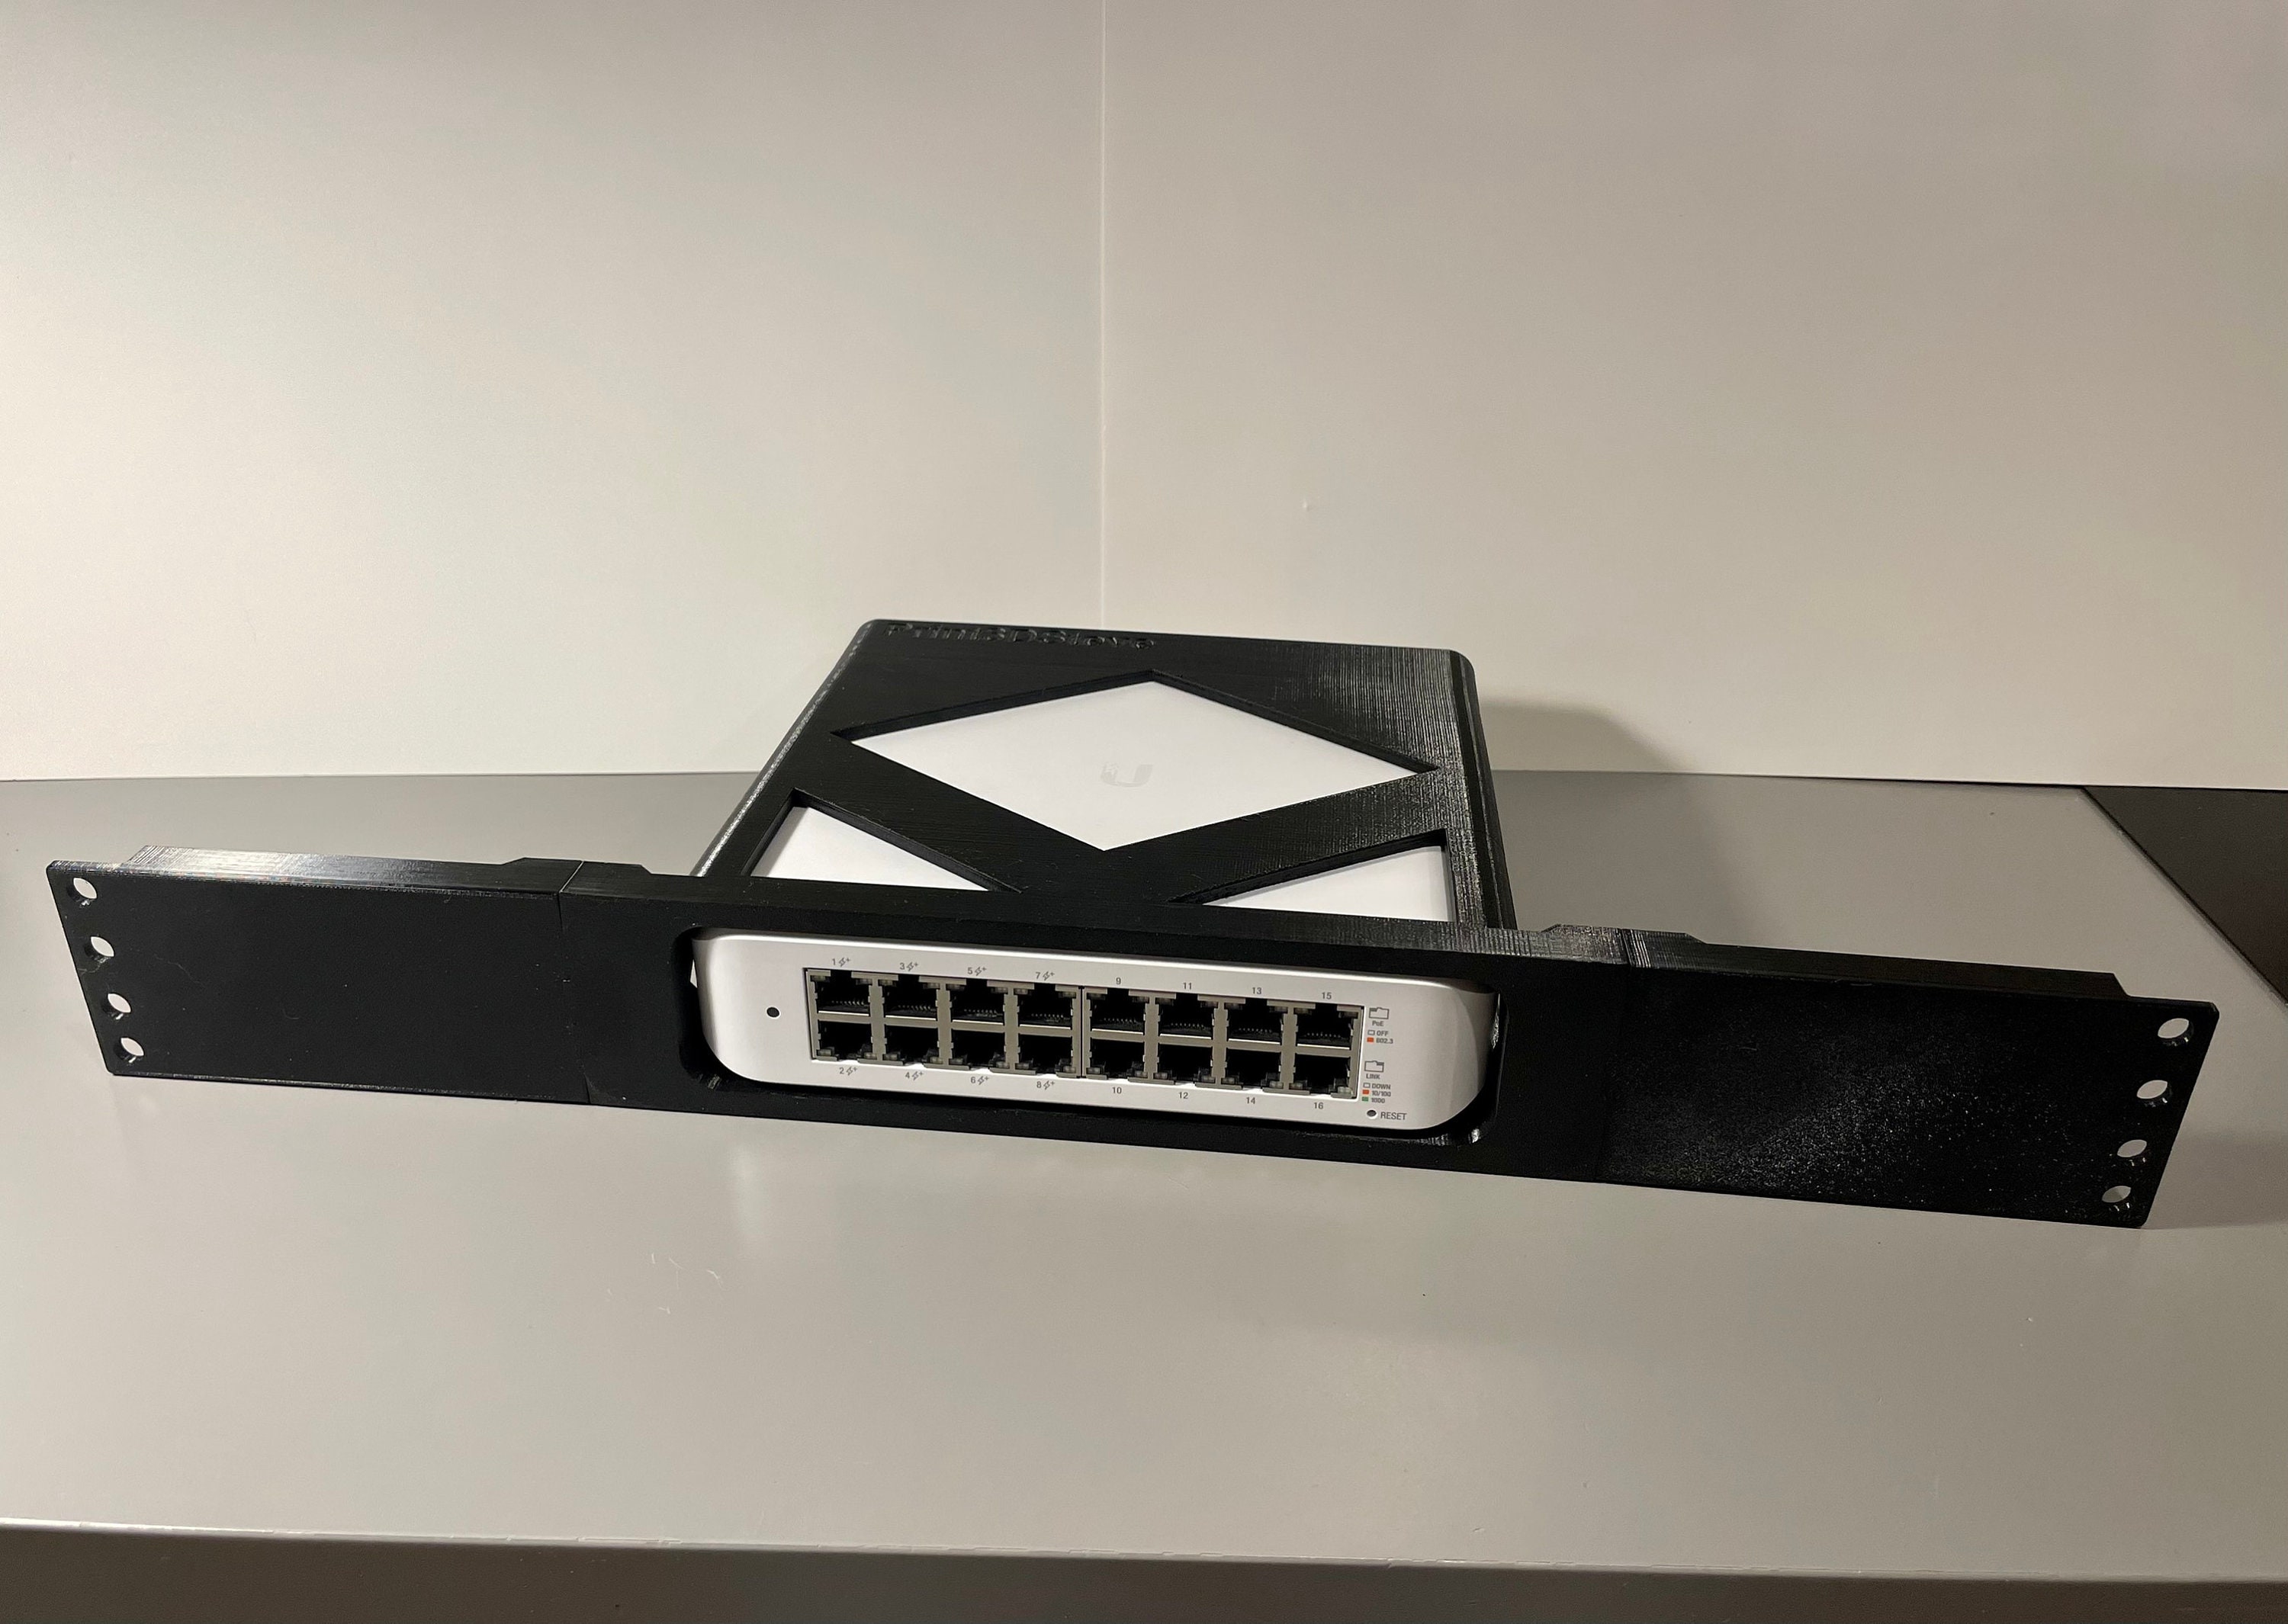 Low on space, so built a 10 rack! : r/Ubiquiti